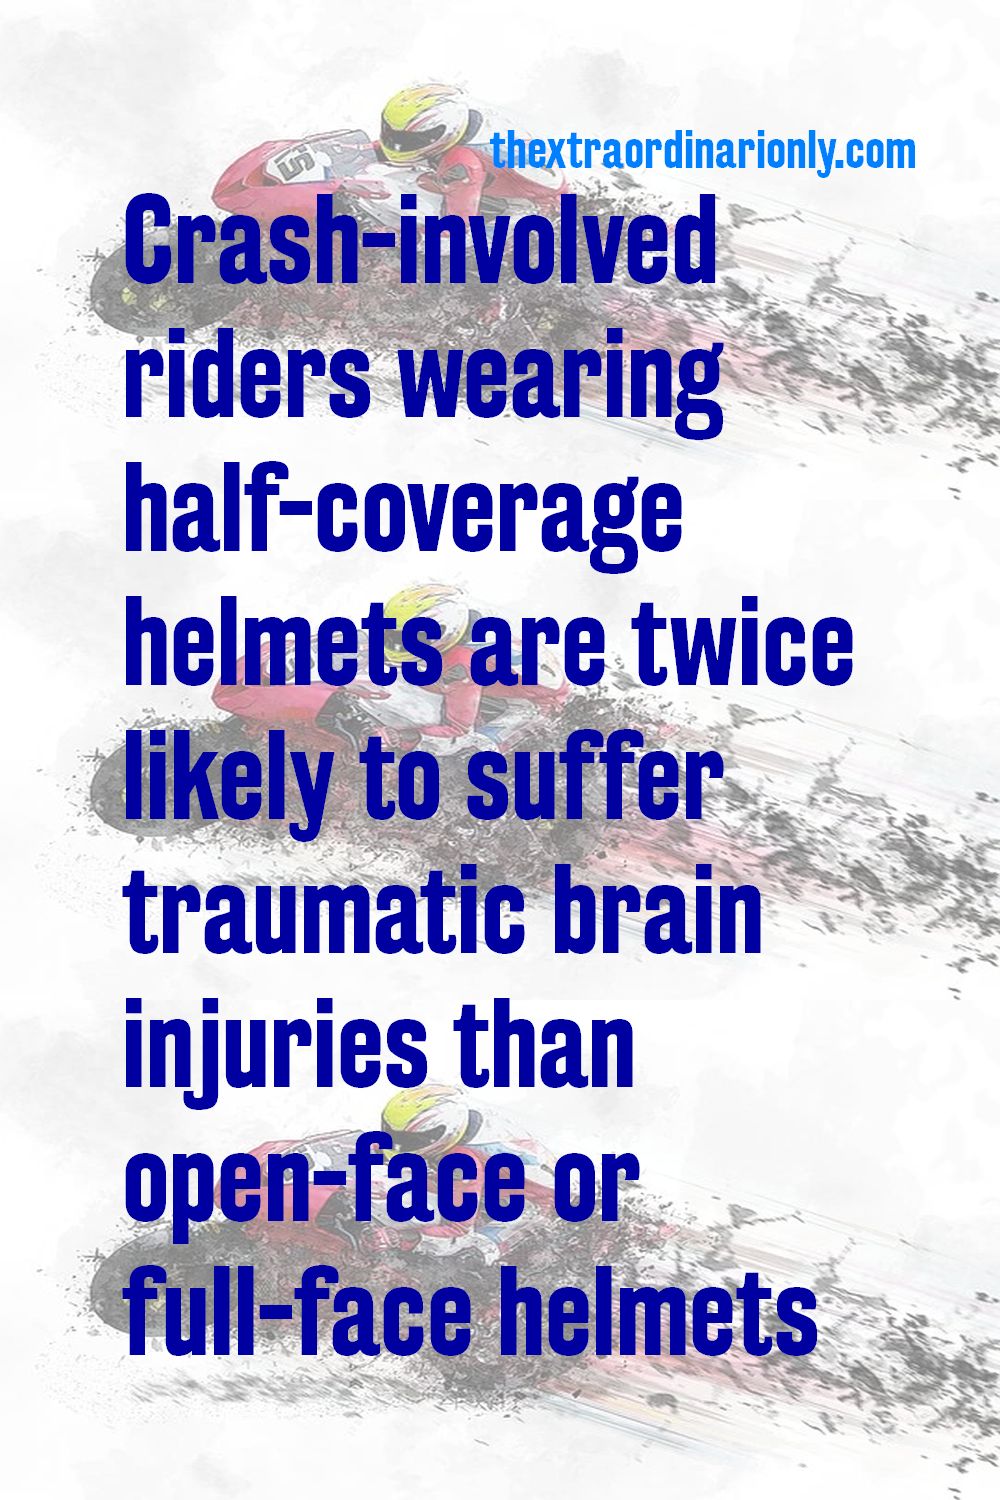 crash-involved riders wearing half-coverage motorcycle helmets were twice as likely to suffer traumatic brain injuries 